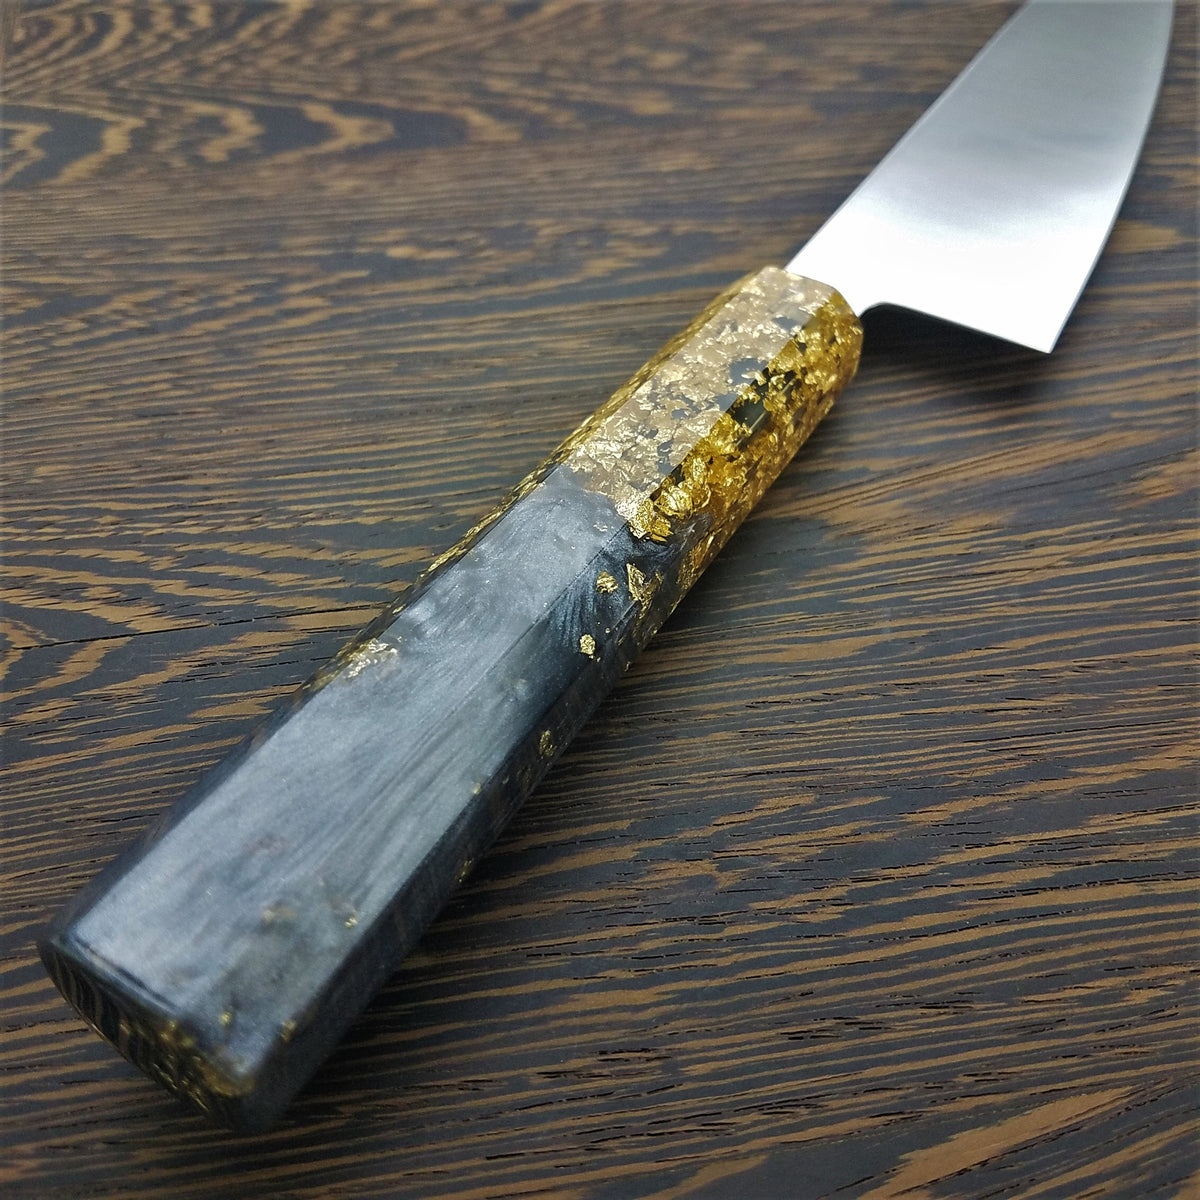 Desire - 210mm (8.25in) Gyuto Chef Knife Stainless Steel